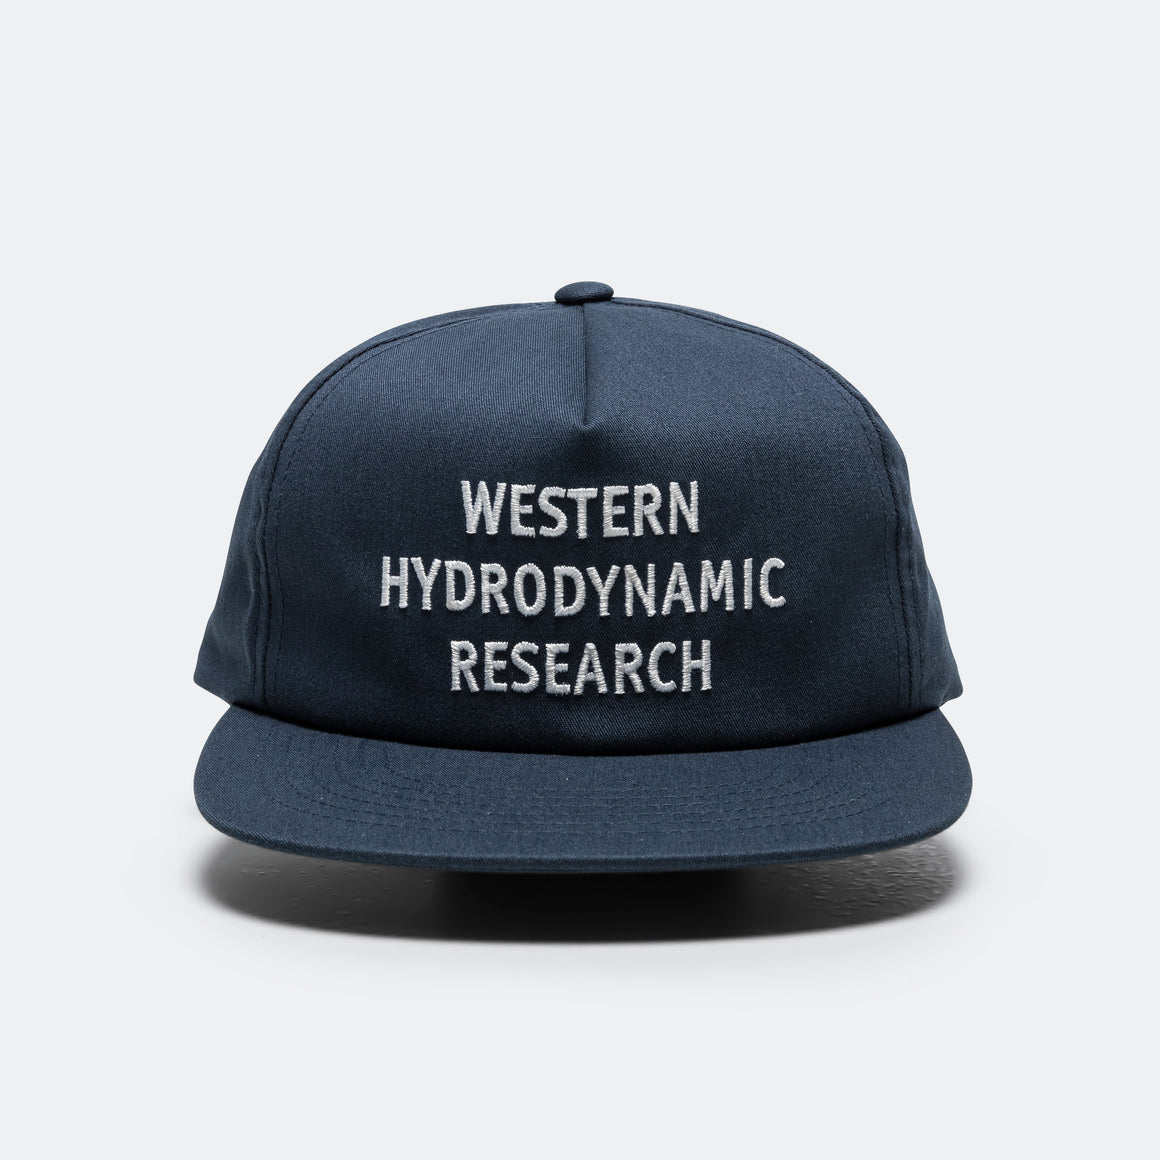 Western Hydrodynamic Research - Promotional Hat - Navy - UP THERE